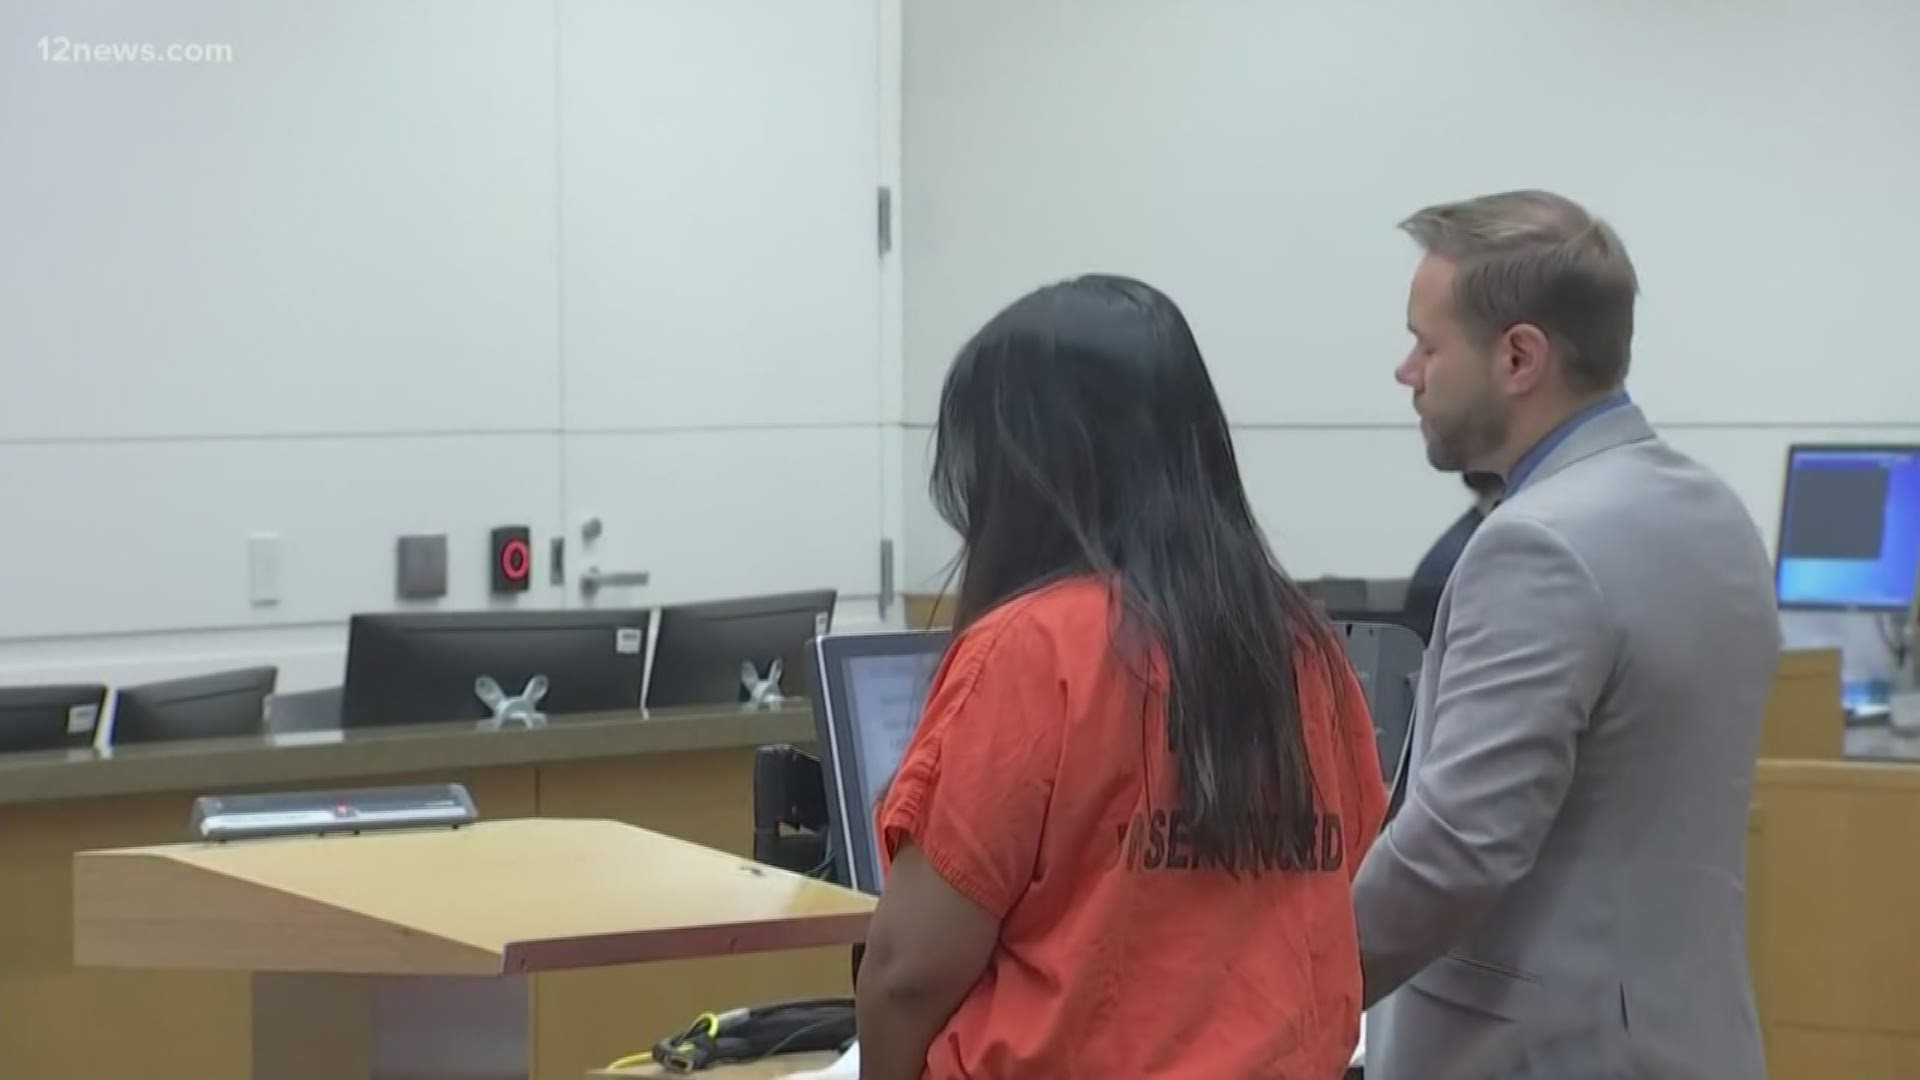 The woman who was charged along with Maricopa County Assessor Paul Petersen appeared in court Thursday. Lynwood Jenet pleaded not guilty to fraud and conspiracy.